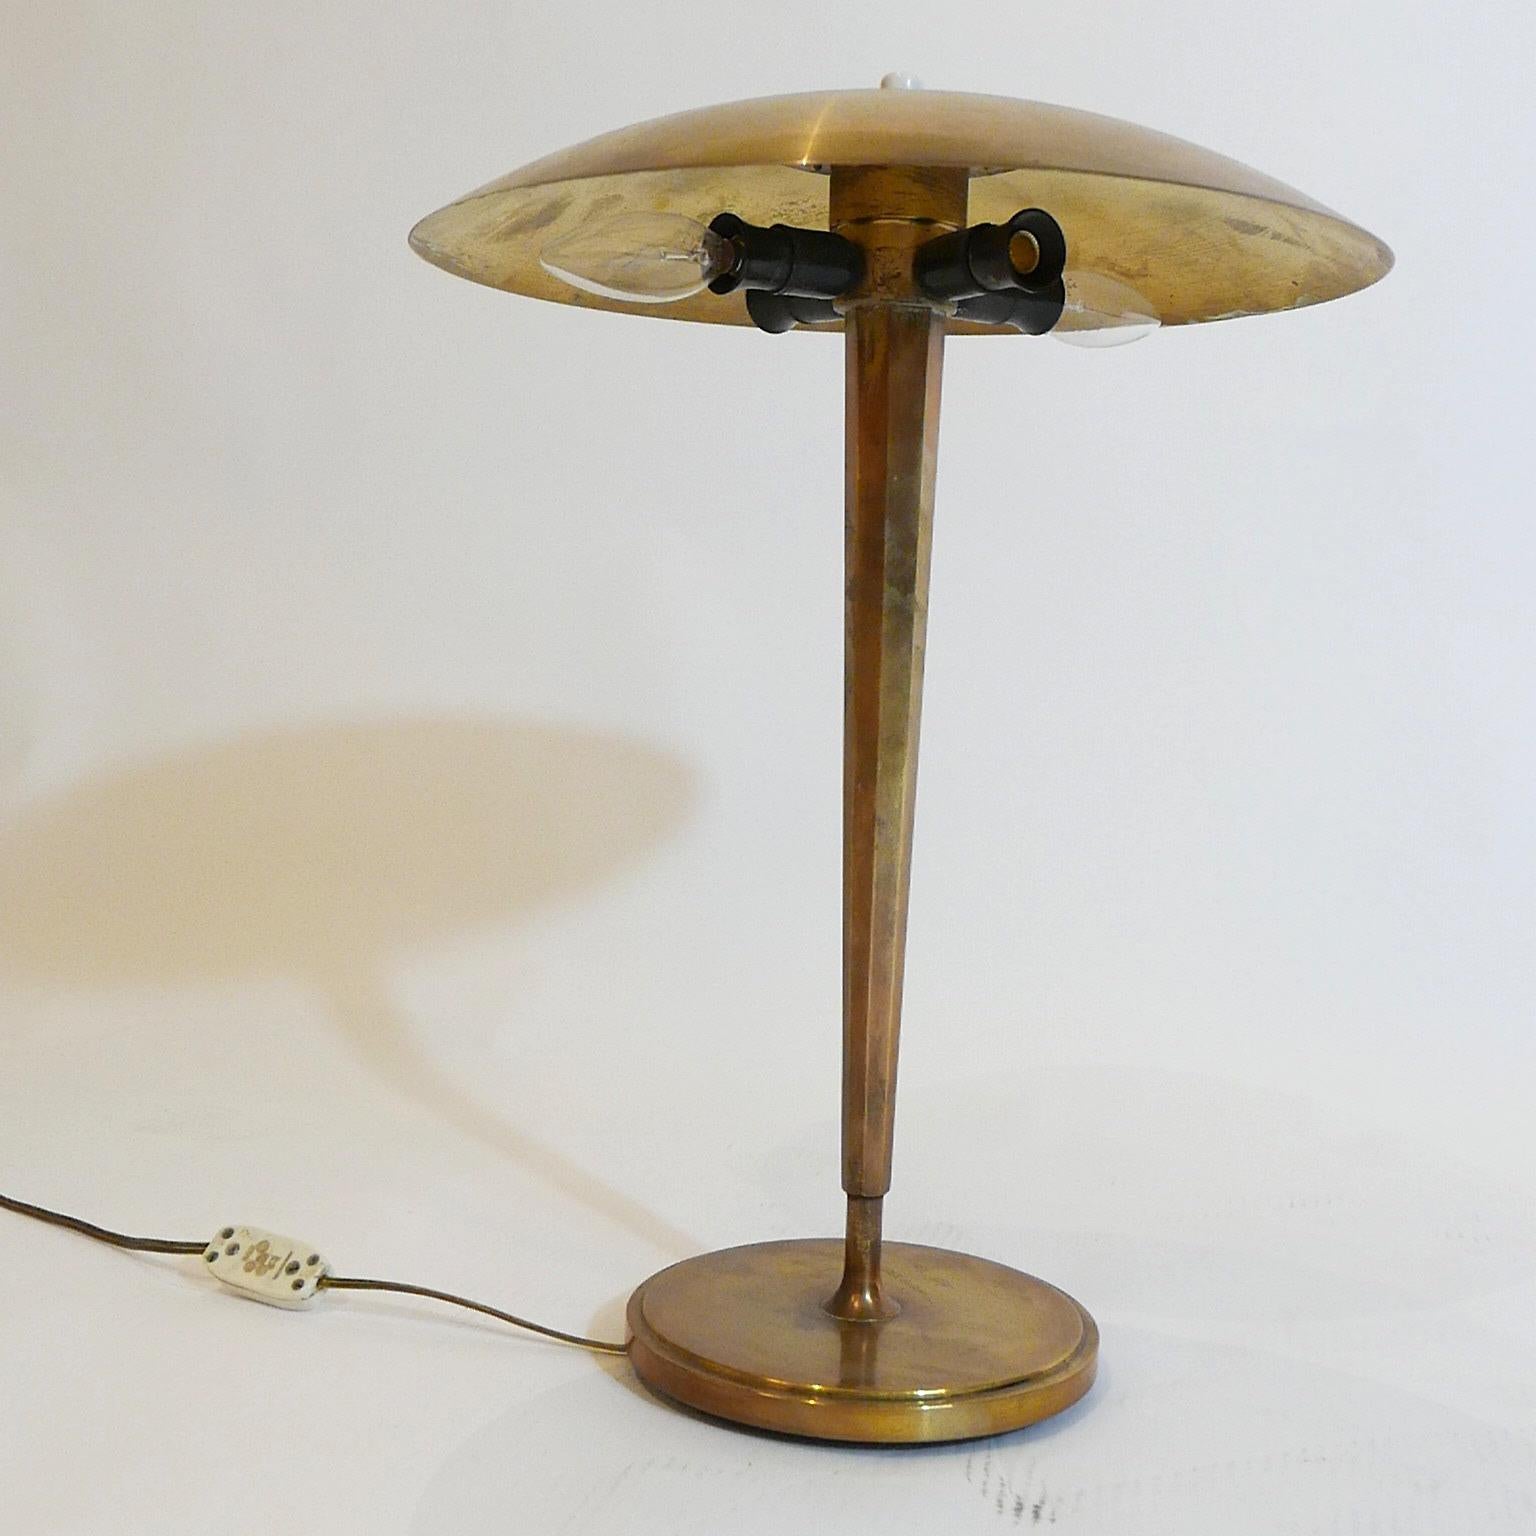 Mid-20th Century Suburb Quality Scandinavian Brass Table/Desk lamp by Bohlmark after Paavo Tynell